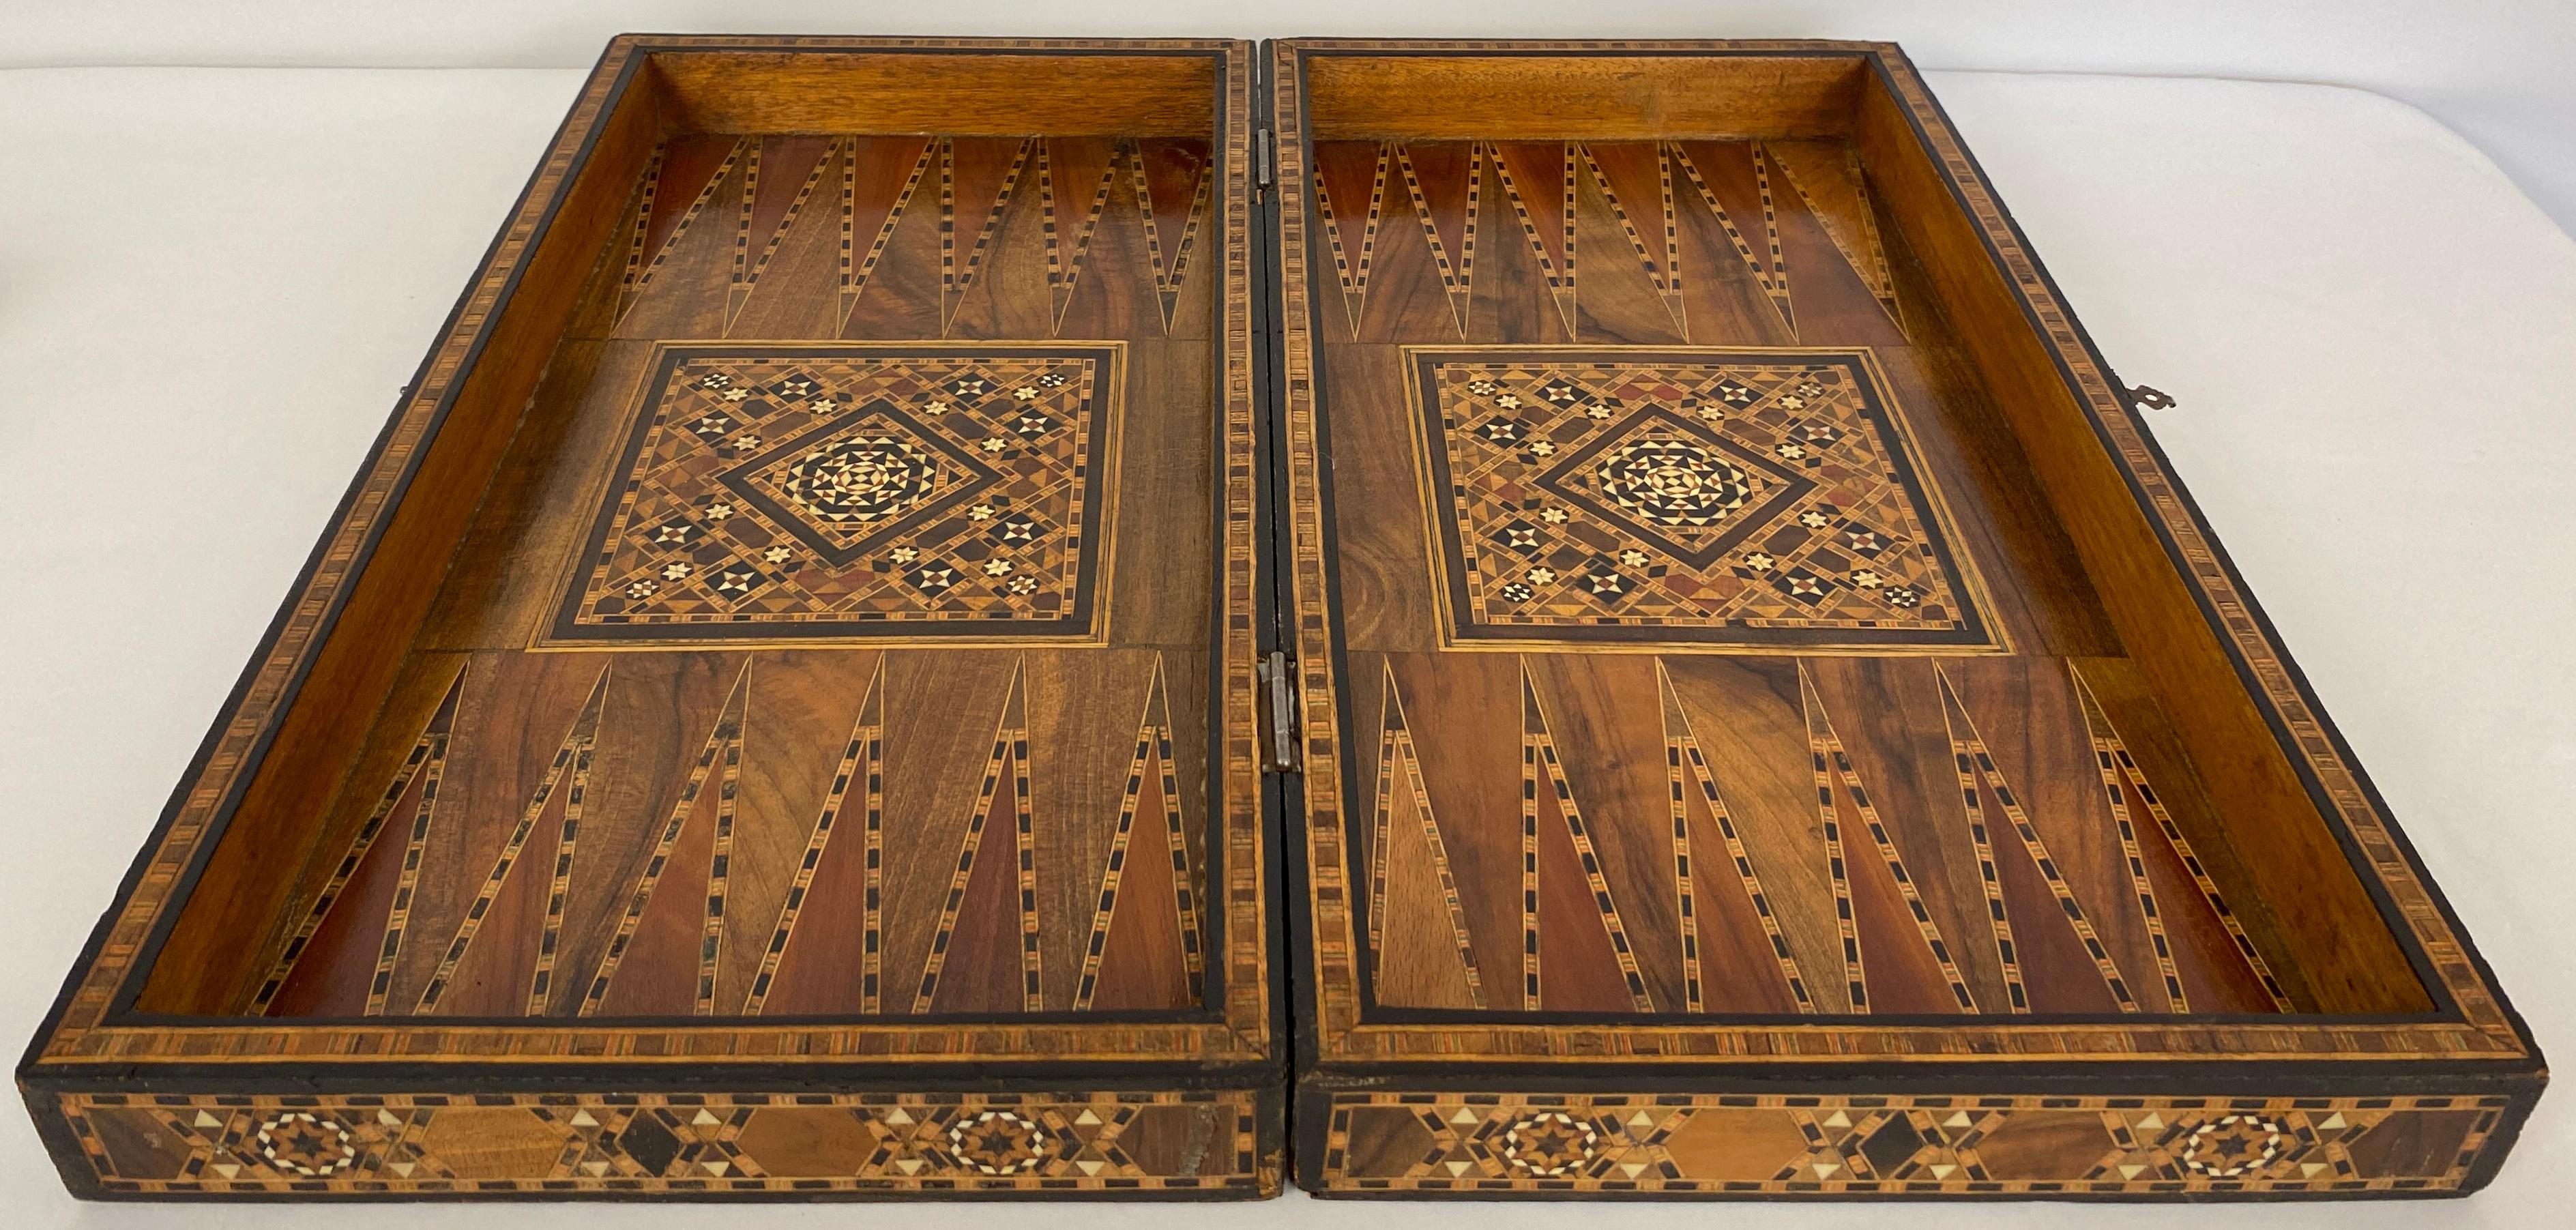 Hand-Carved Syrian Mosaic Wooden Inlaid Marquetry Box Backgammon Set